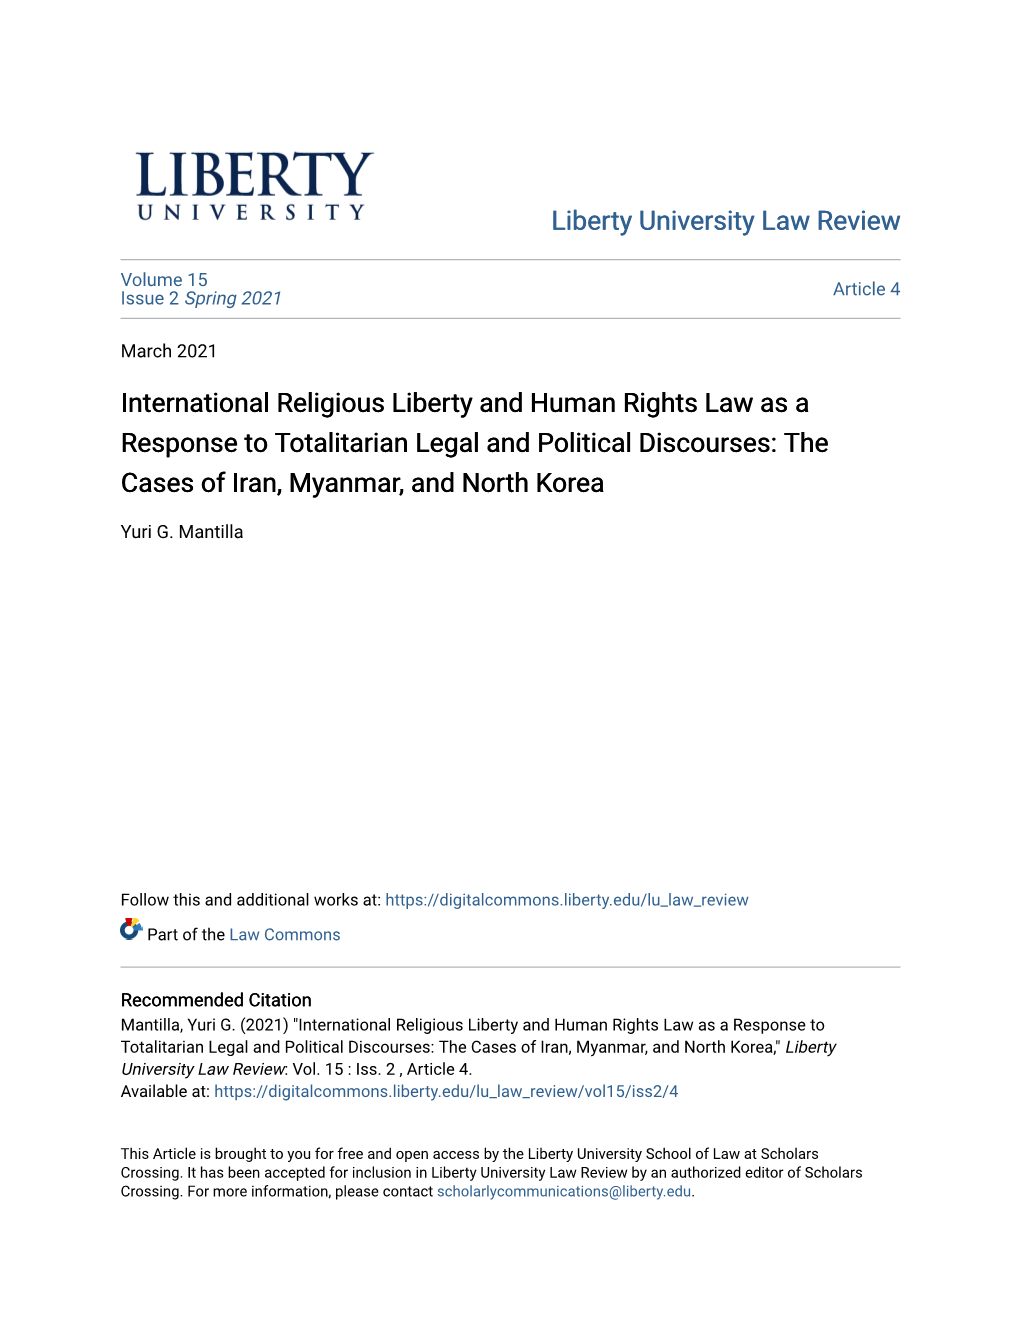 International Religious Liberty and Human Rights Law As a Response to Totalitarian Legal and Political Discourses: the Cases of Iran, Myanmar, and North Korea